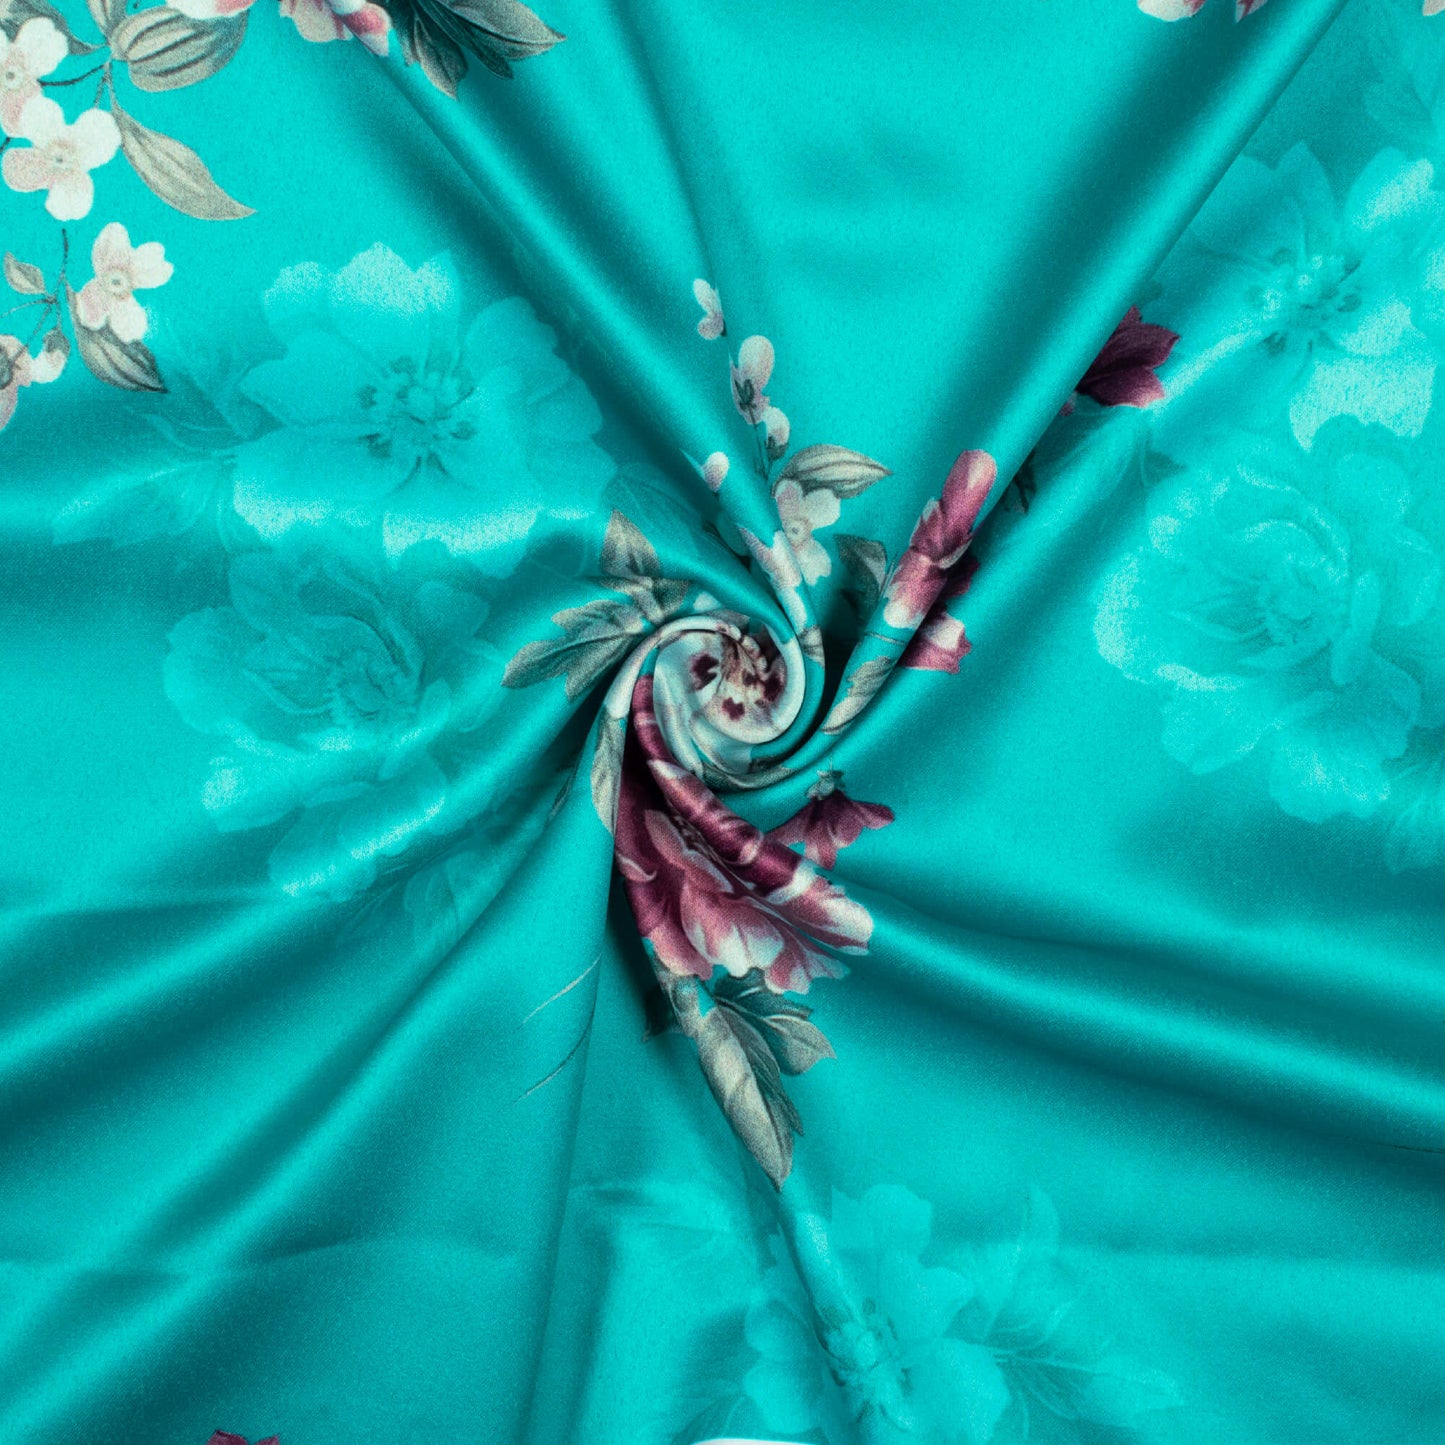 Turquoise And Red Floral Pattern Digital Print Charmeuse Satin Fabric (Width 58 Inches)